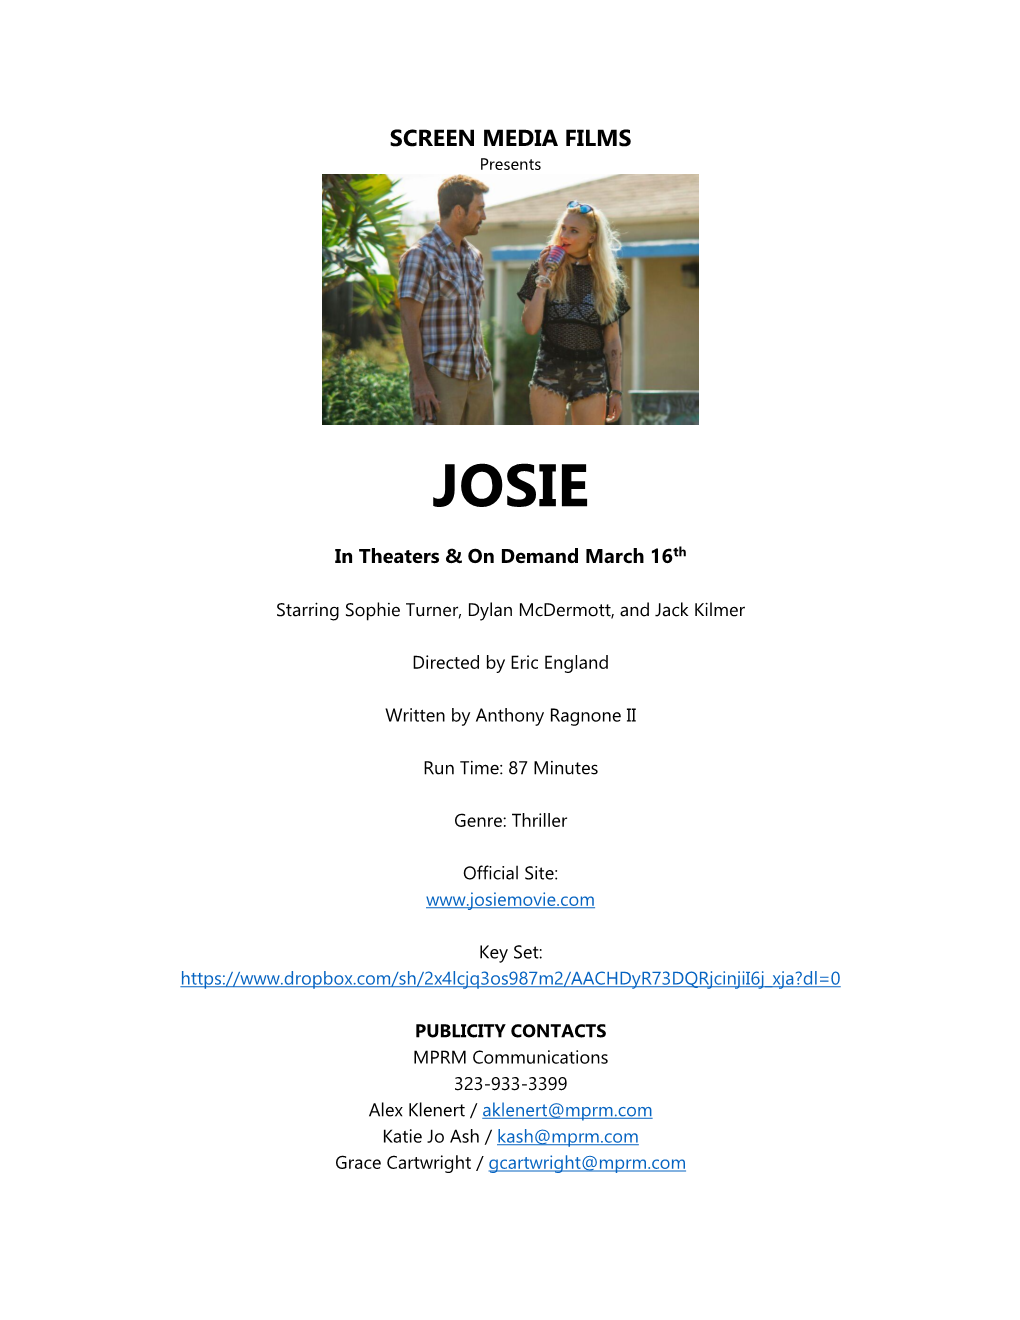 JOSIE in Theaters & on Demand March 16Th